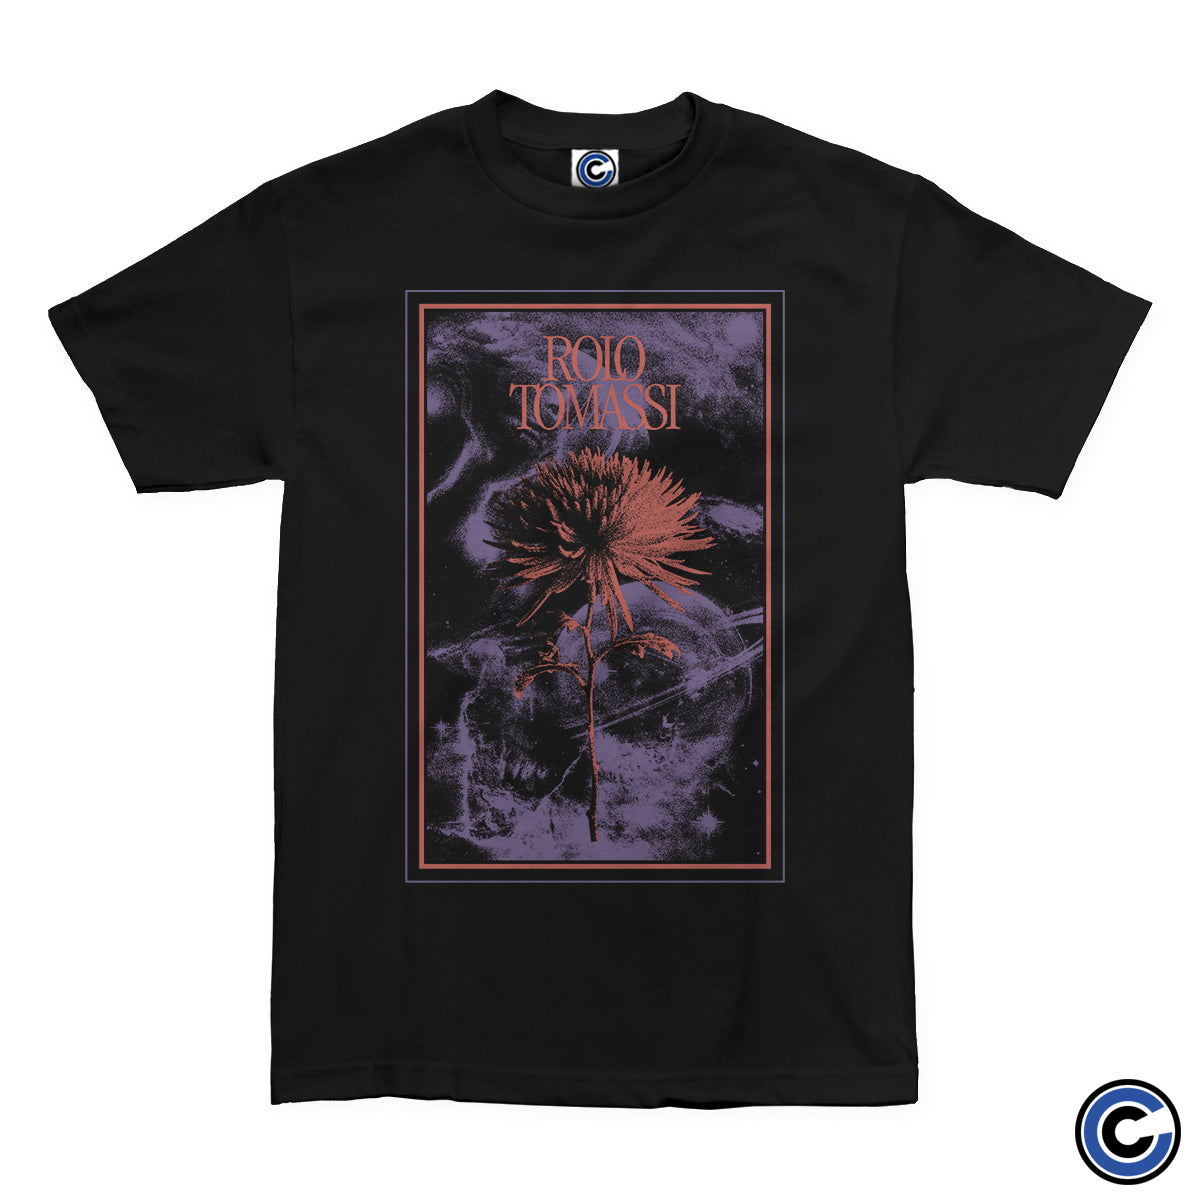 Rolo Tomassi "Flower Face" Shirt